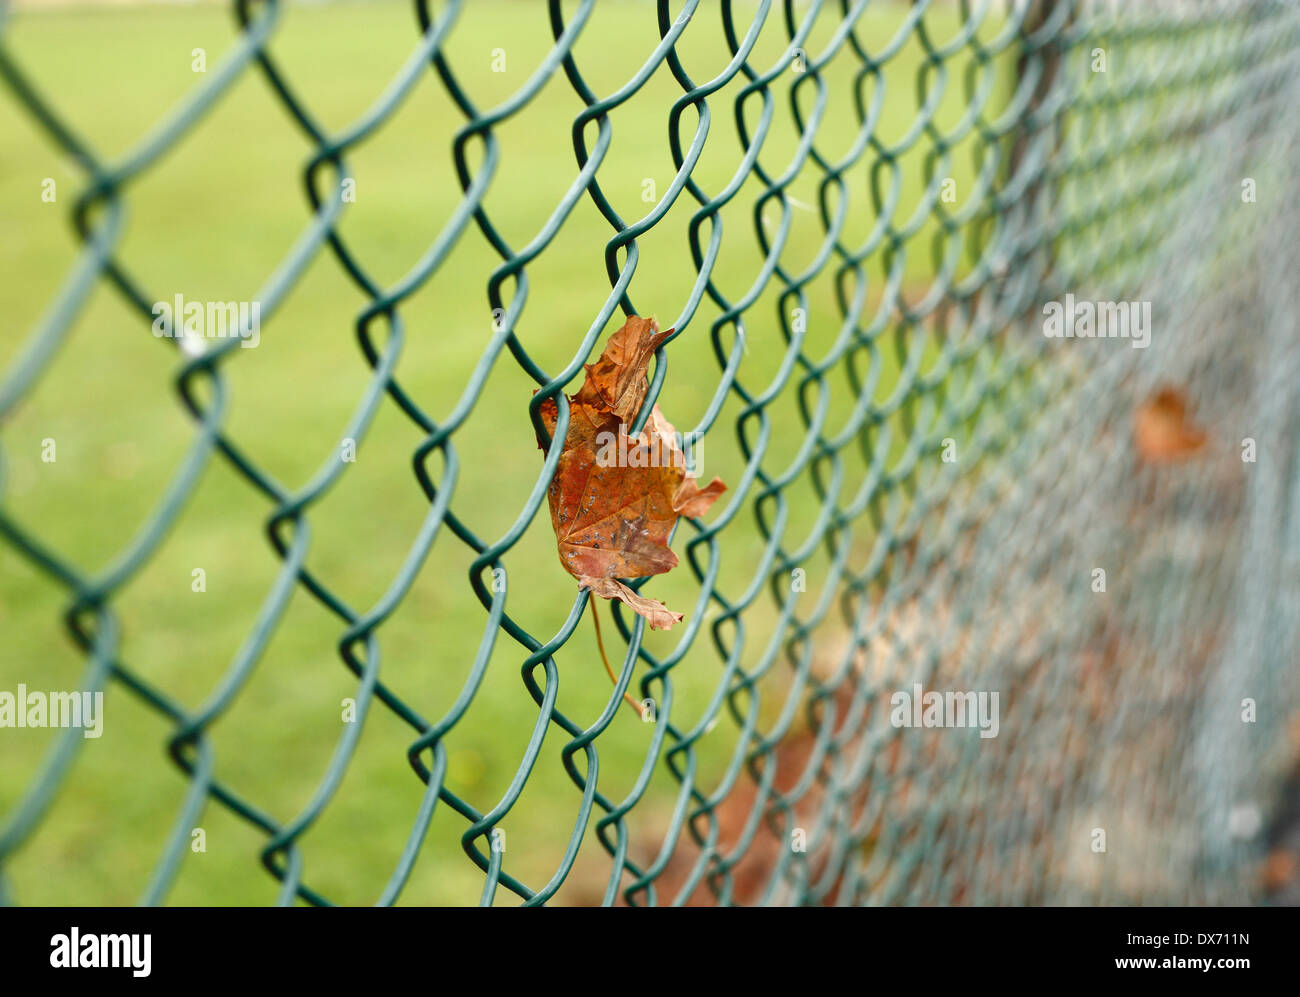 Autumn leaf caught in a chain link fence. Stock Photo